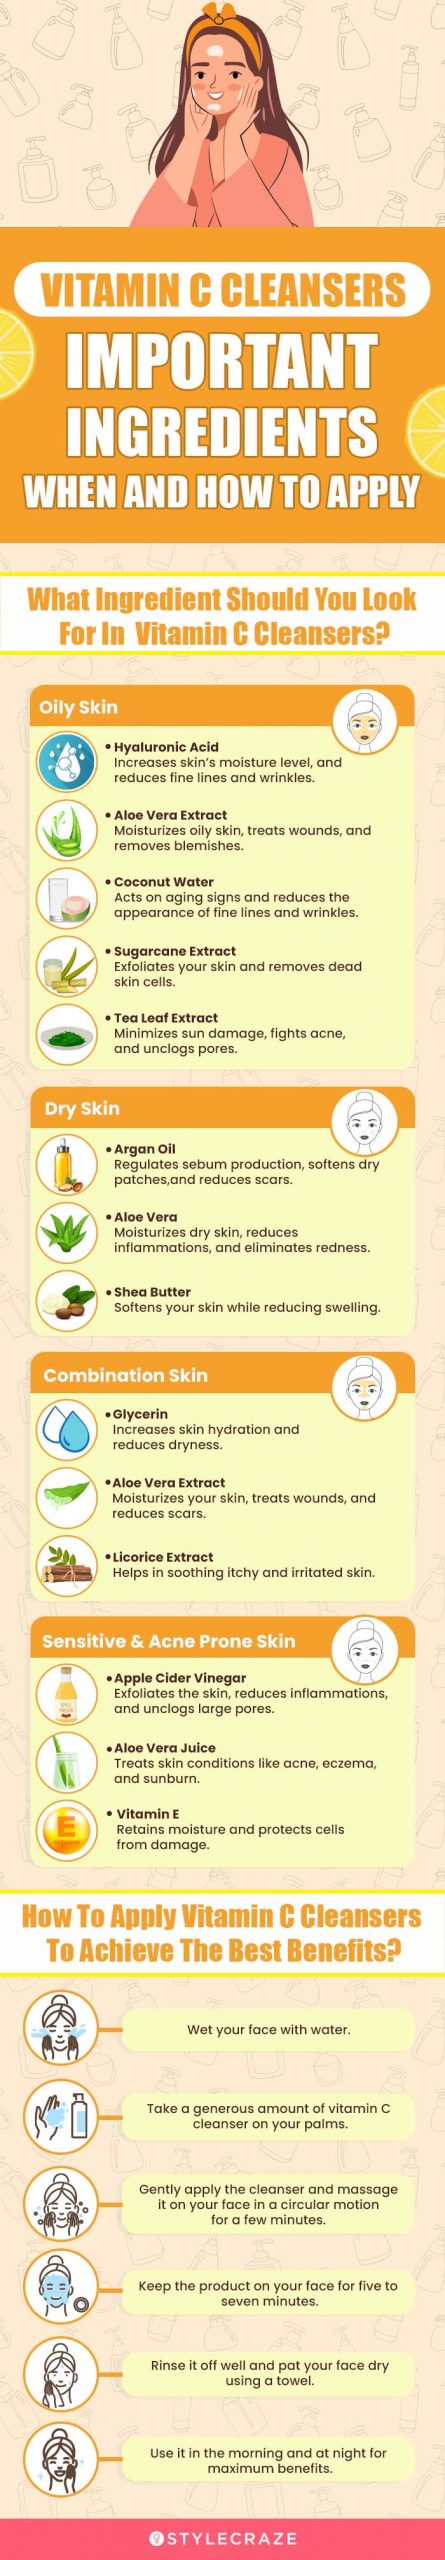 Vitamin C Cleansers: Important Ingredients, When & How To Apply (infographic)